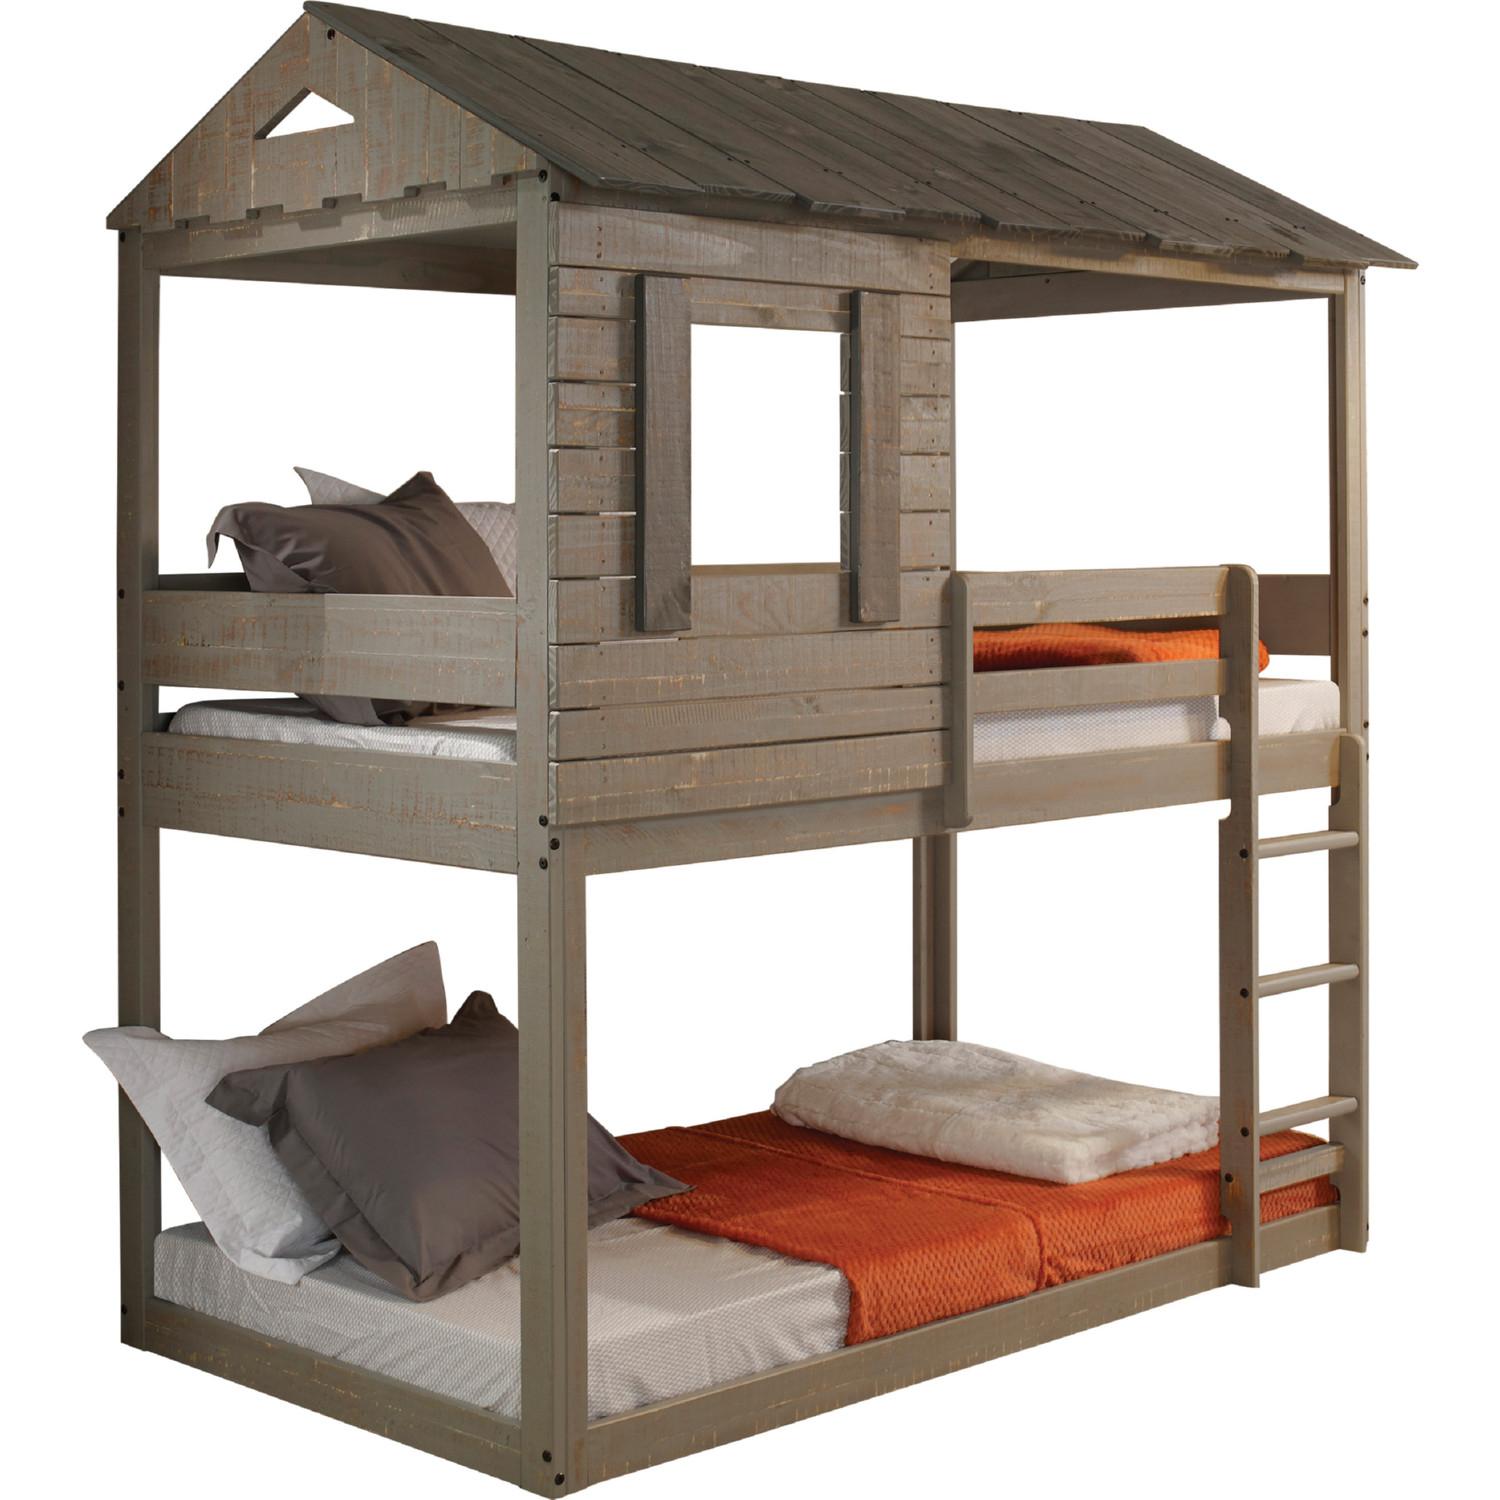 

    
Cottage Rustic Gray Twin/Twin Bunk Bed by Acme Darlene 38140
